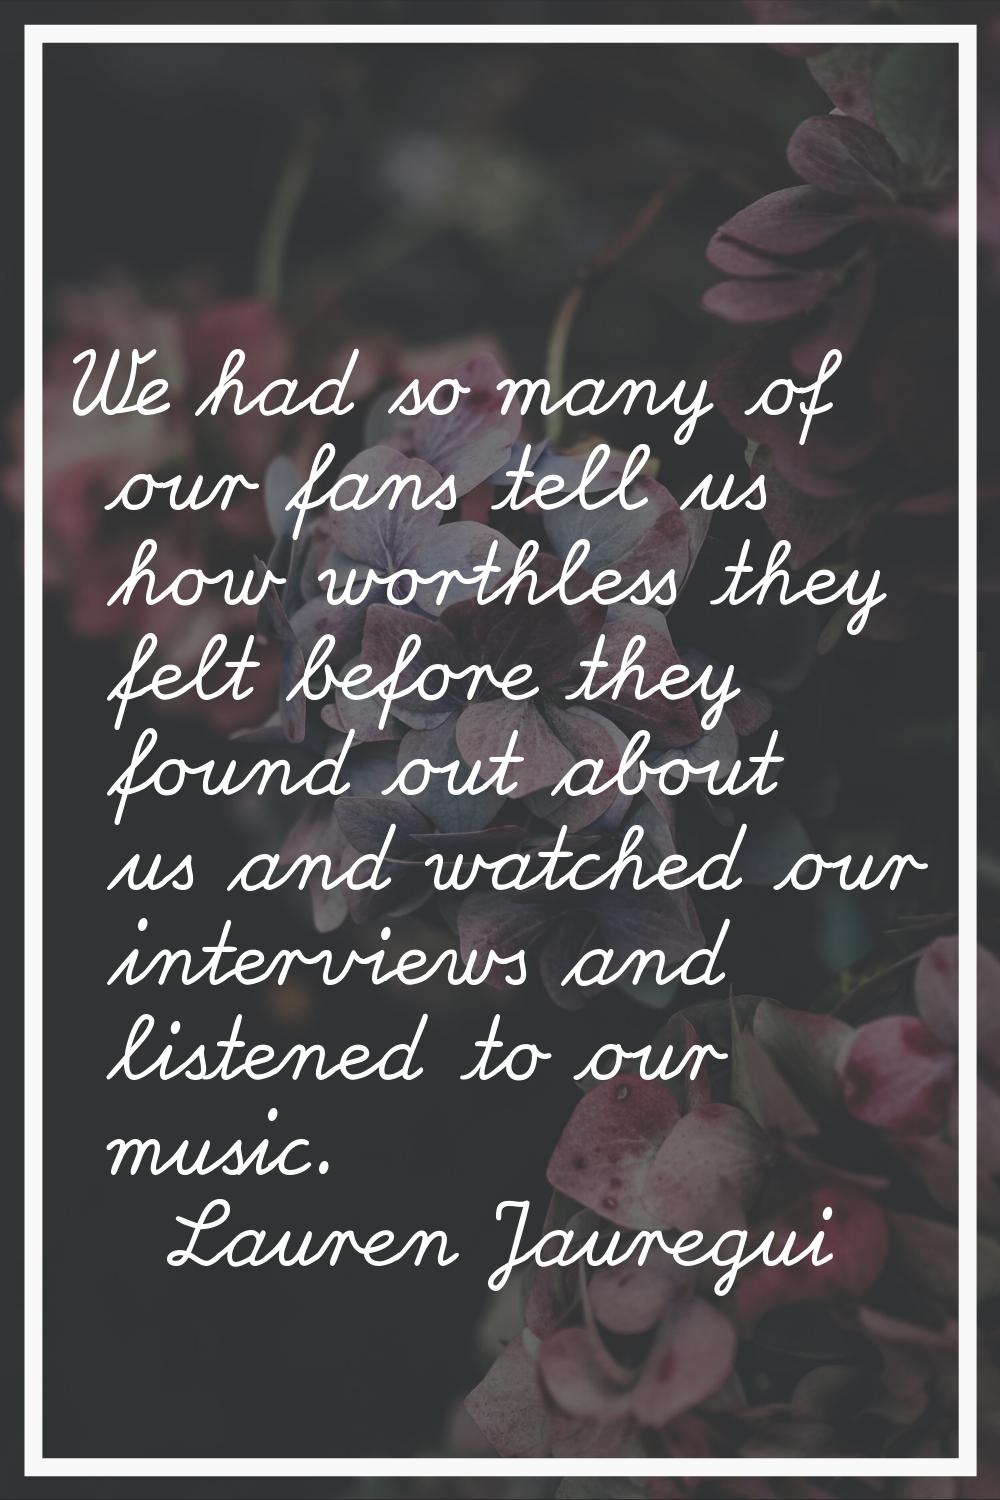 We had so many of our fans tell us how worthless they felt before they found out about us and watch